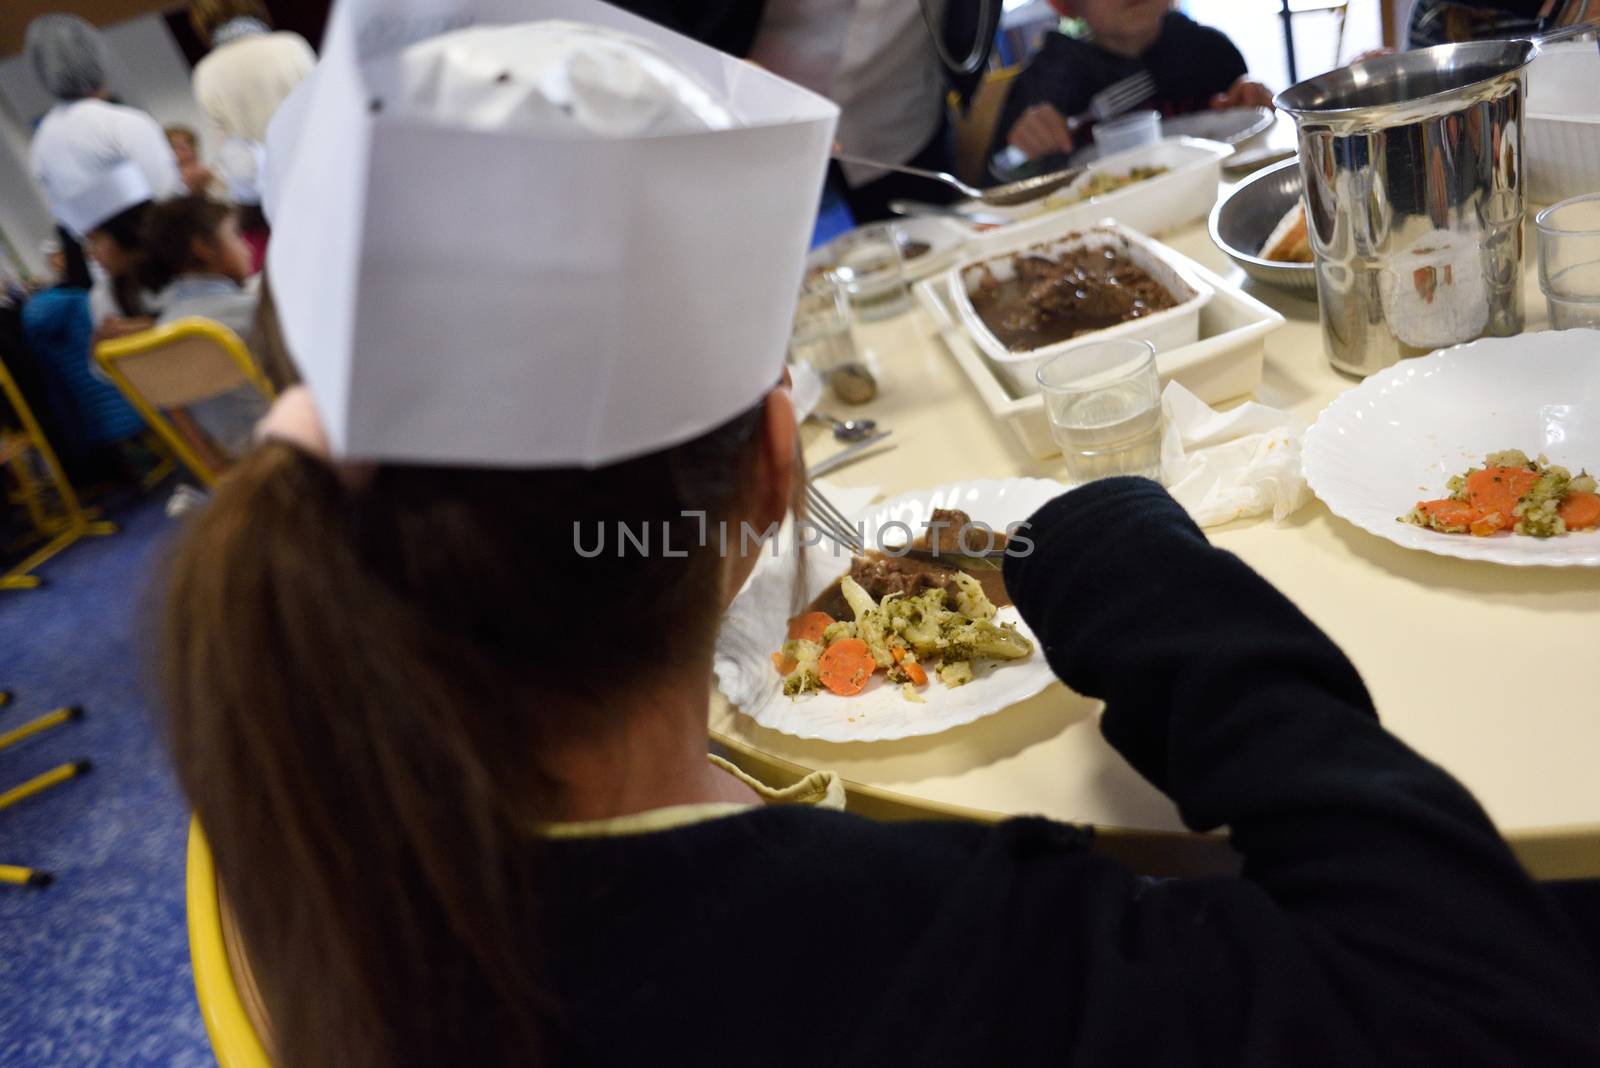 FRANCE, Valence : A pupil eats vegetables for the exceptionnal menu at Celestin Freinet school canteen in Valence (Dr�me), on September 25, 2015 on the occasion of French gastronomy days from September 25 to September 27, 2015. 